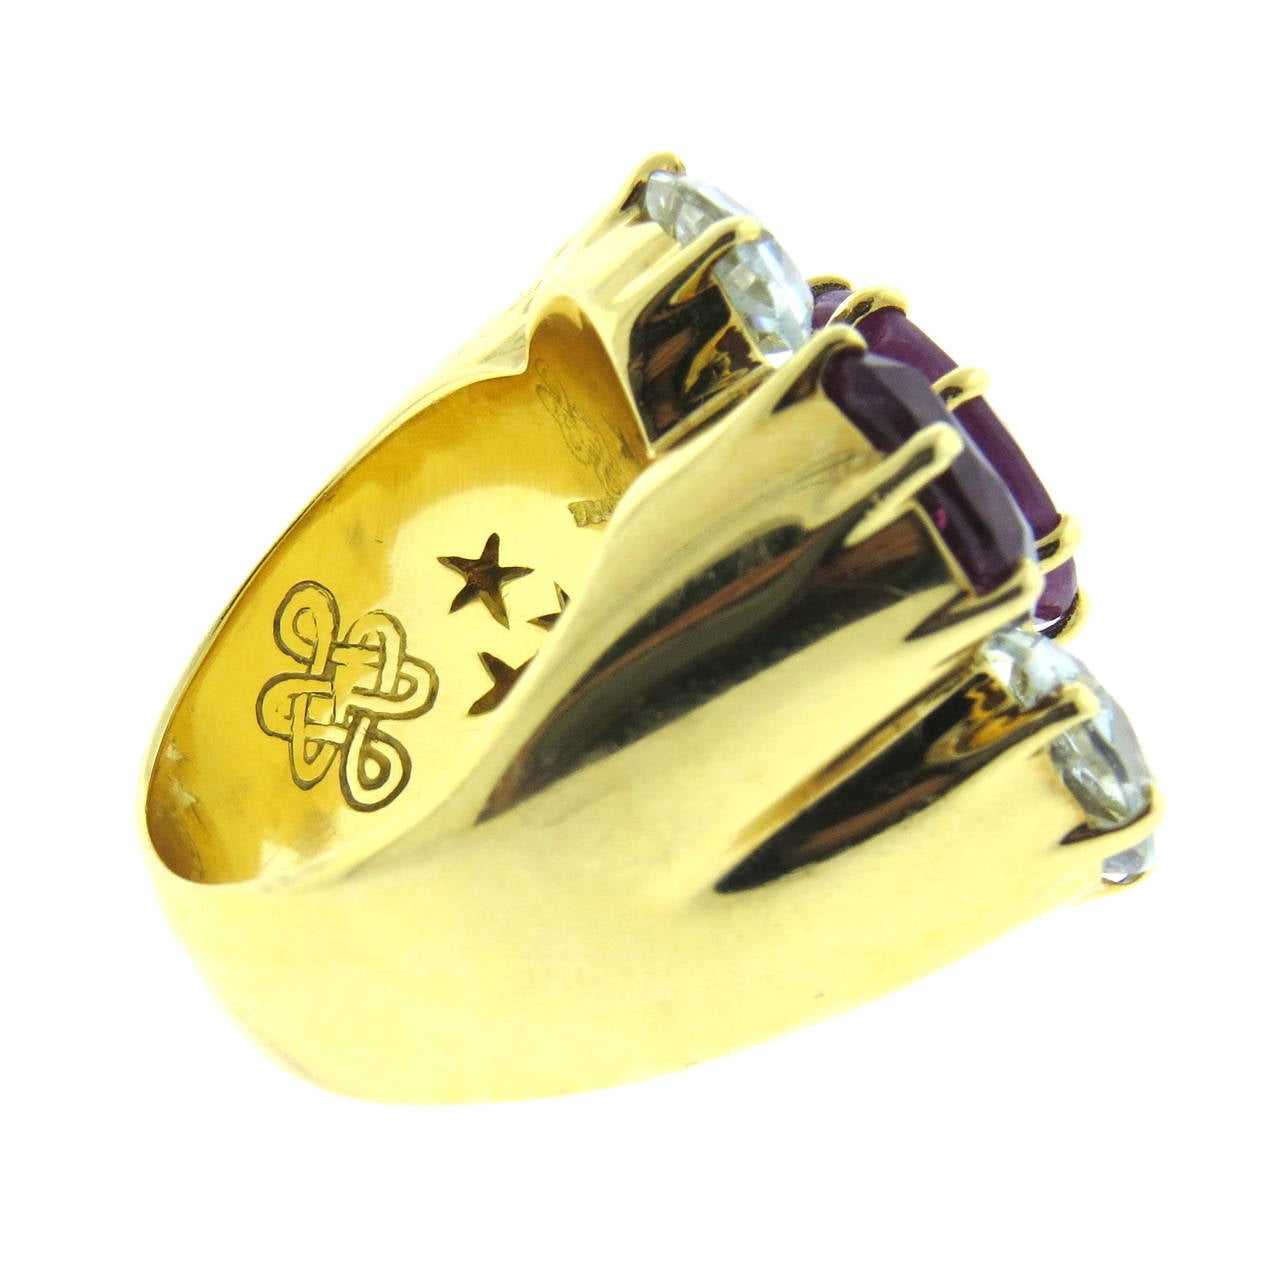 18k gold ring by H Stern for Diane Von Furstenberg from Harmony collection, featuring ruby, tourmaline, aquamarine and citrine gemstones. Ring size 8, ring top is 25mm x 26mm. Marked with DVF and H Stern star marks, 750,H.S. weight of the piece - 27